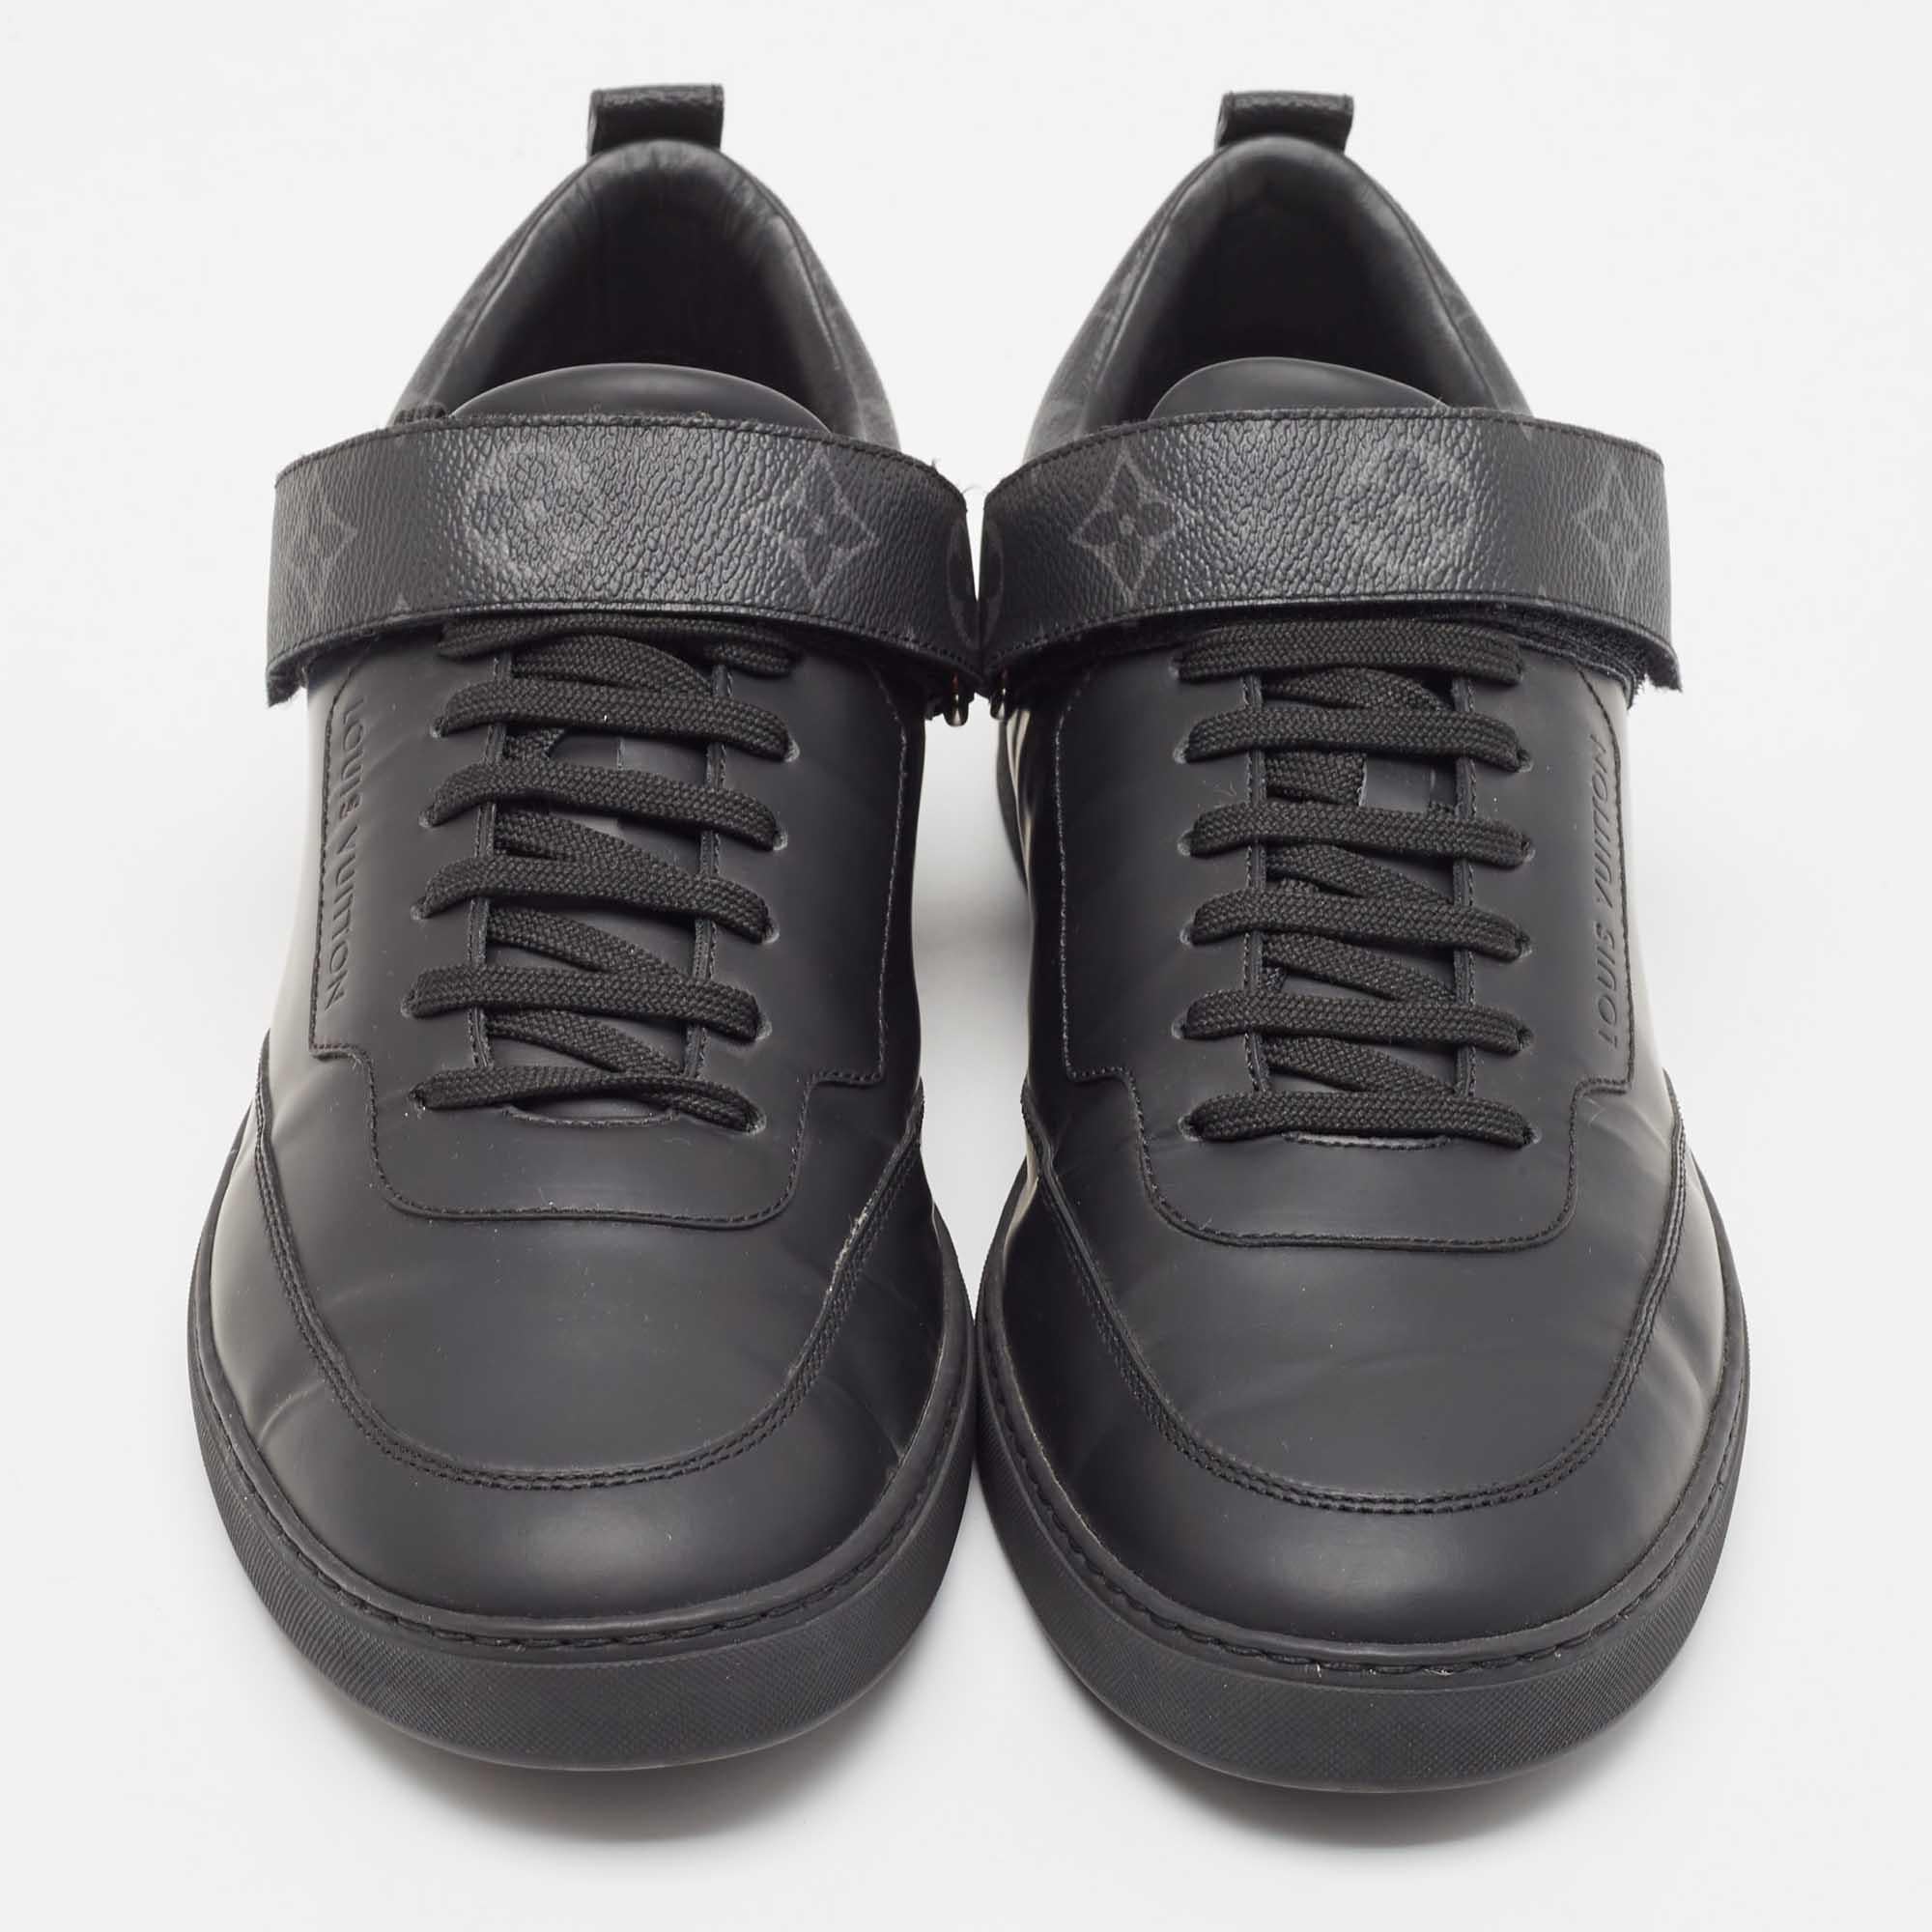 Step into fashion-forward luxury with these LV black sneakers. These premium kicks offer a harmonious blend of style and comfort, perfect for those who demand sophistication in every step.

Includes: Original Dustbag, Info Booklet, Extra Lace

